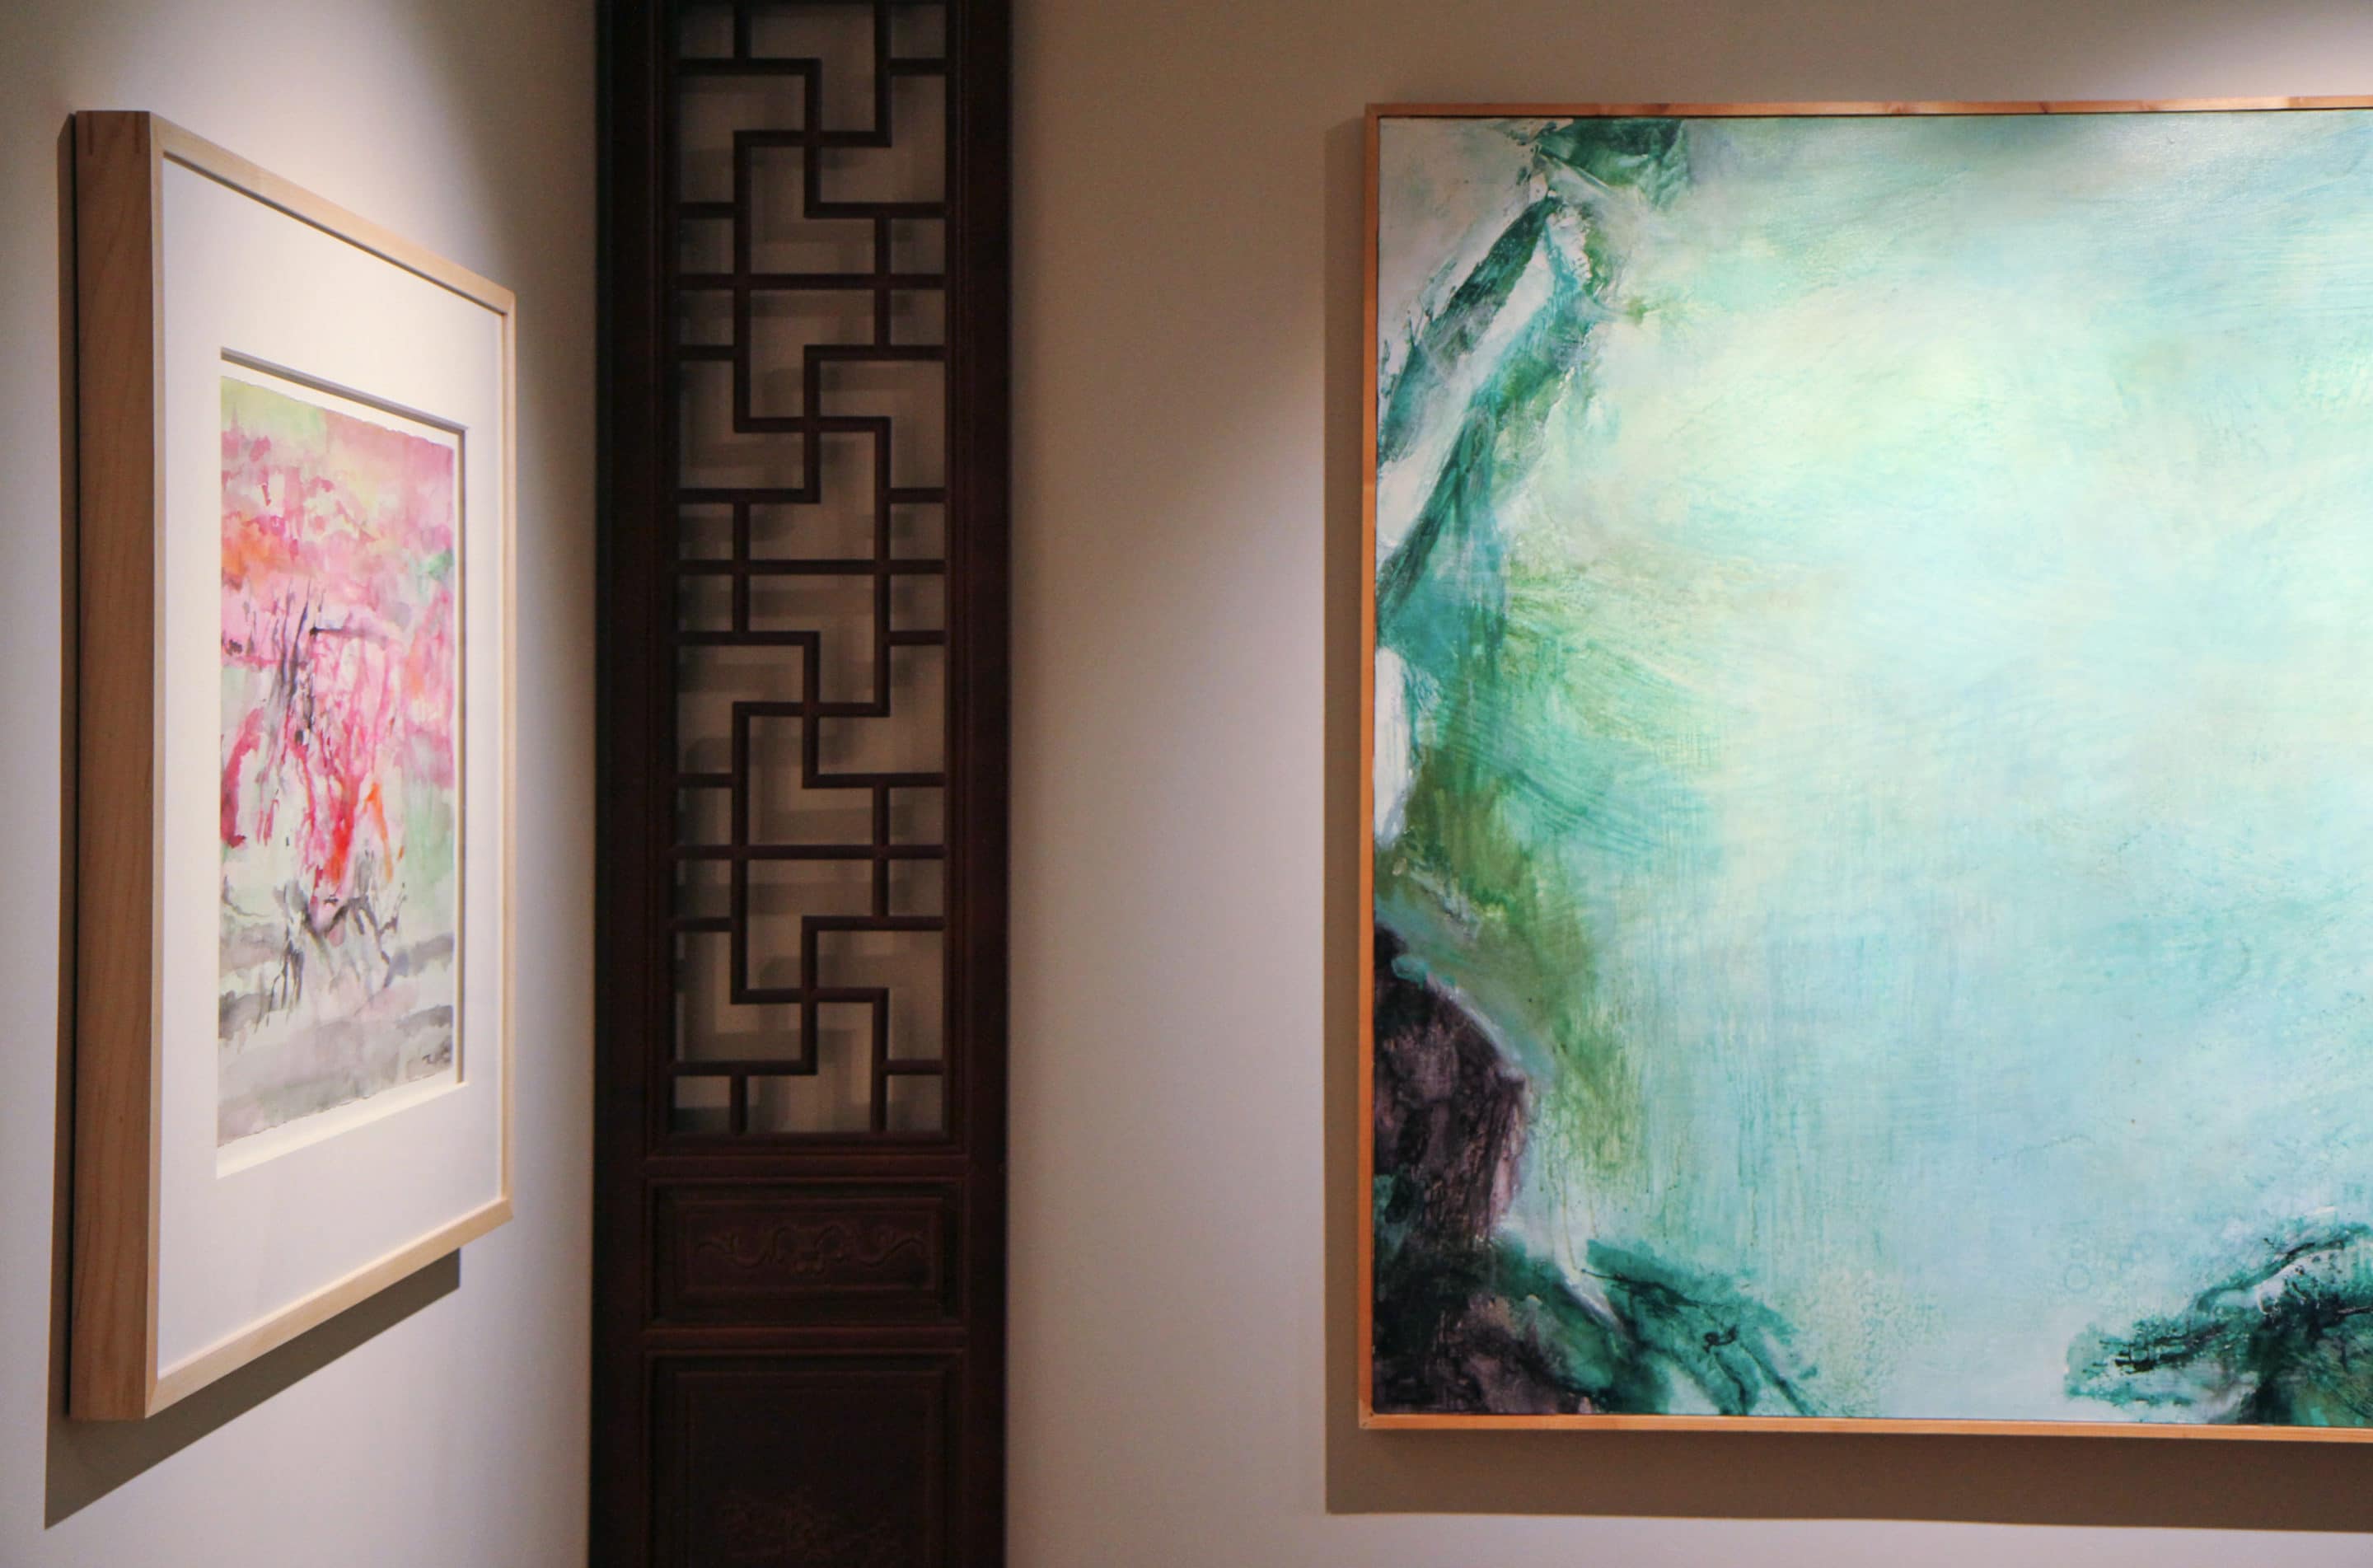 « Zao Wou-Ki: Eternal return to China » at the Villepin Gallery in Hong Kong (by appointment only)